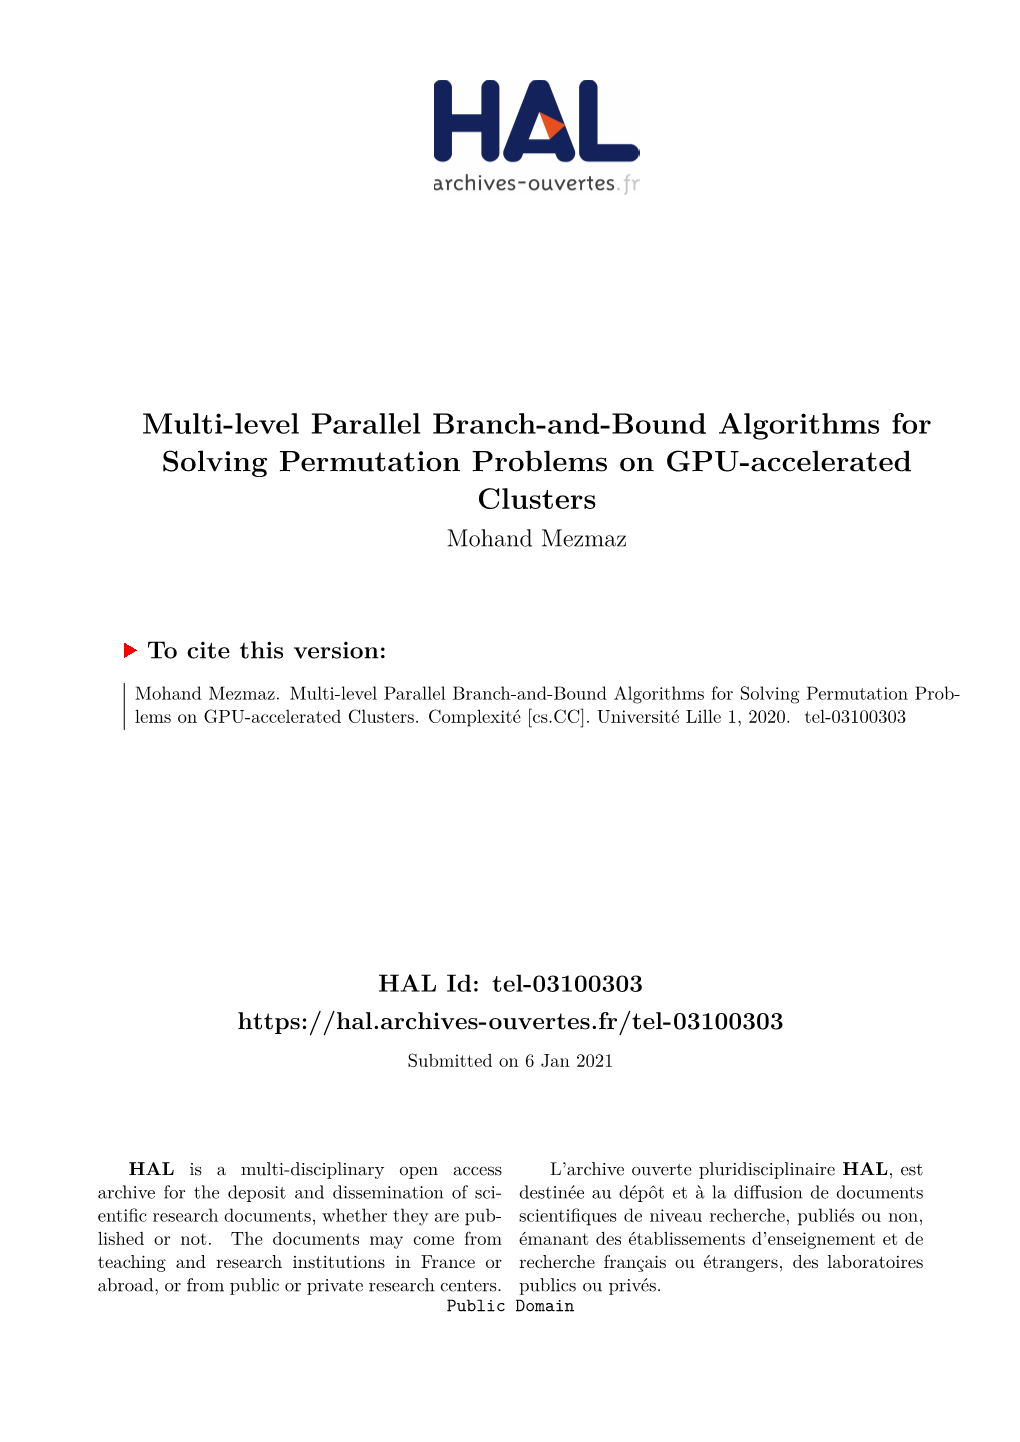 Multi-Level Parallel Branch-And-Bound Algorithms for Solving Permutation Problems on GPU-Accelerated Clusters Mohand Mezmaz